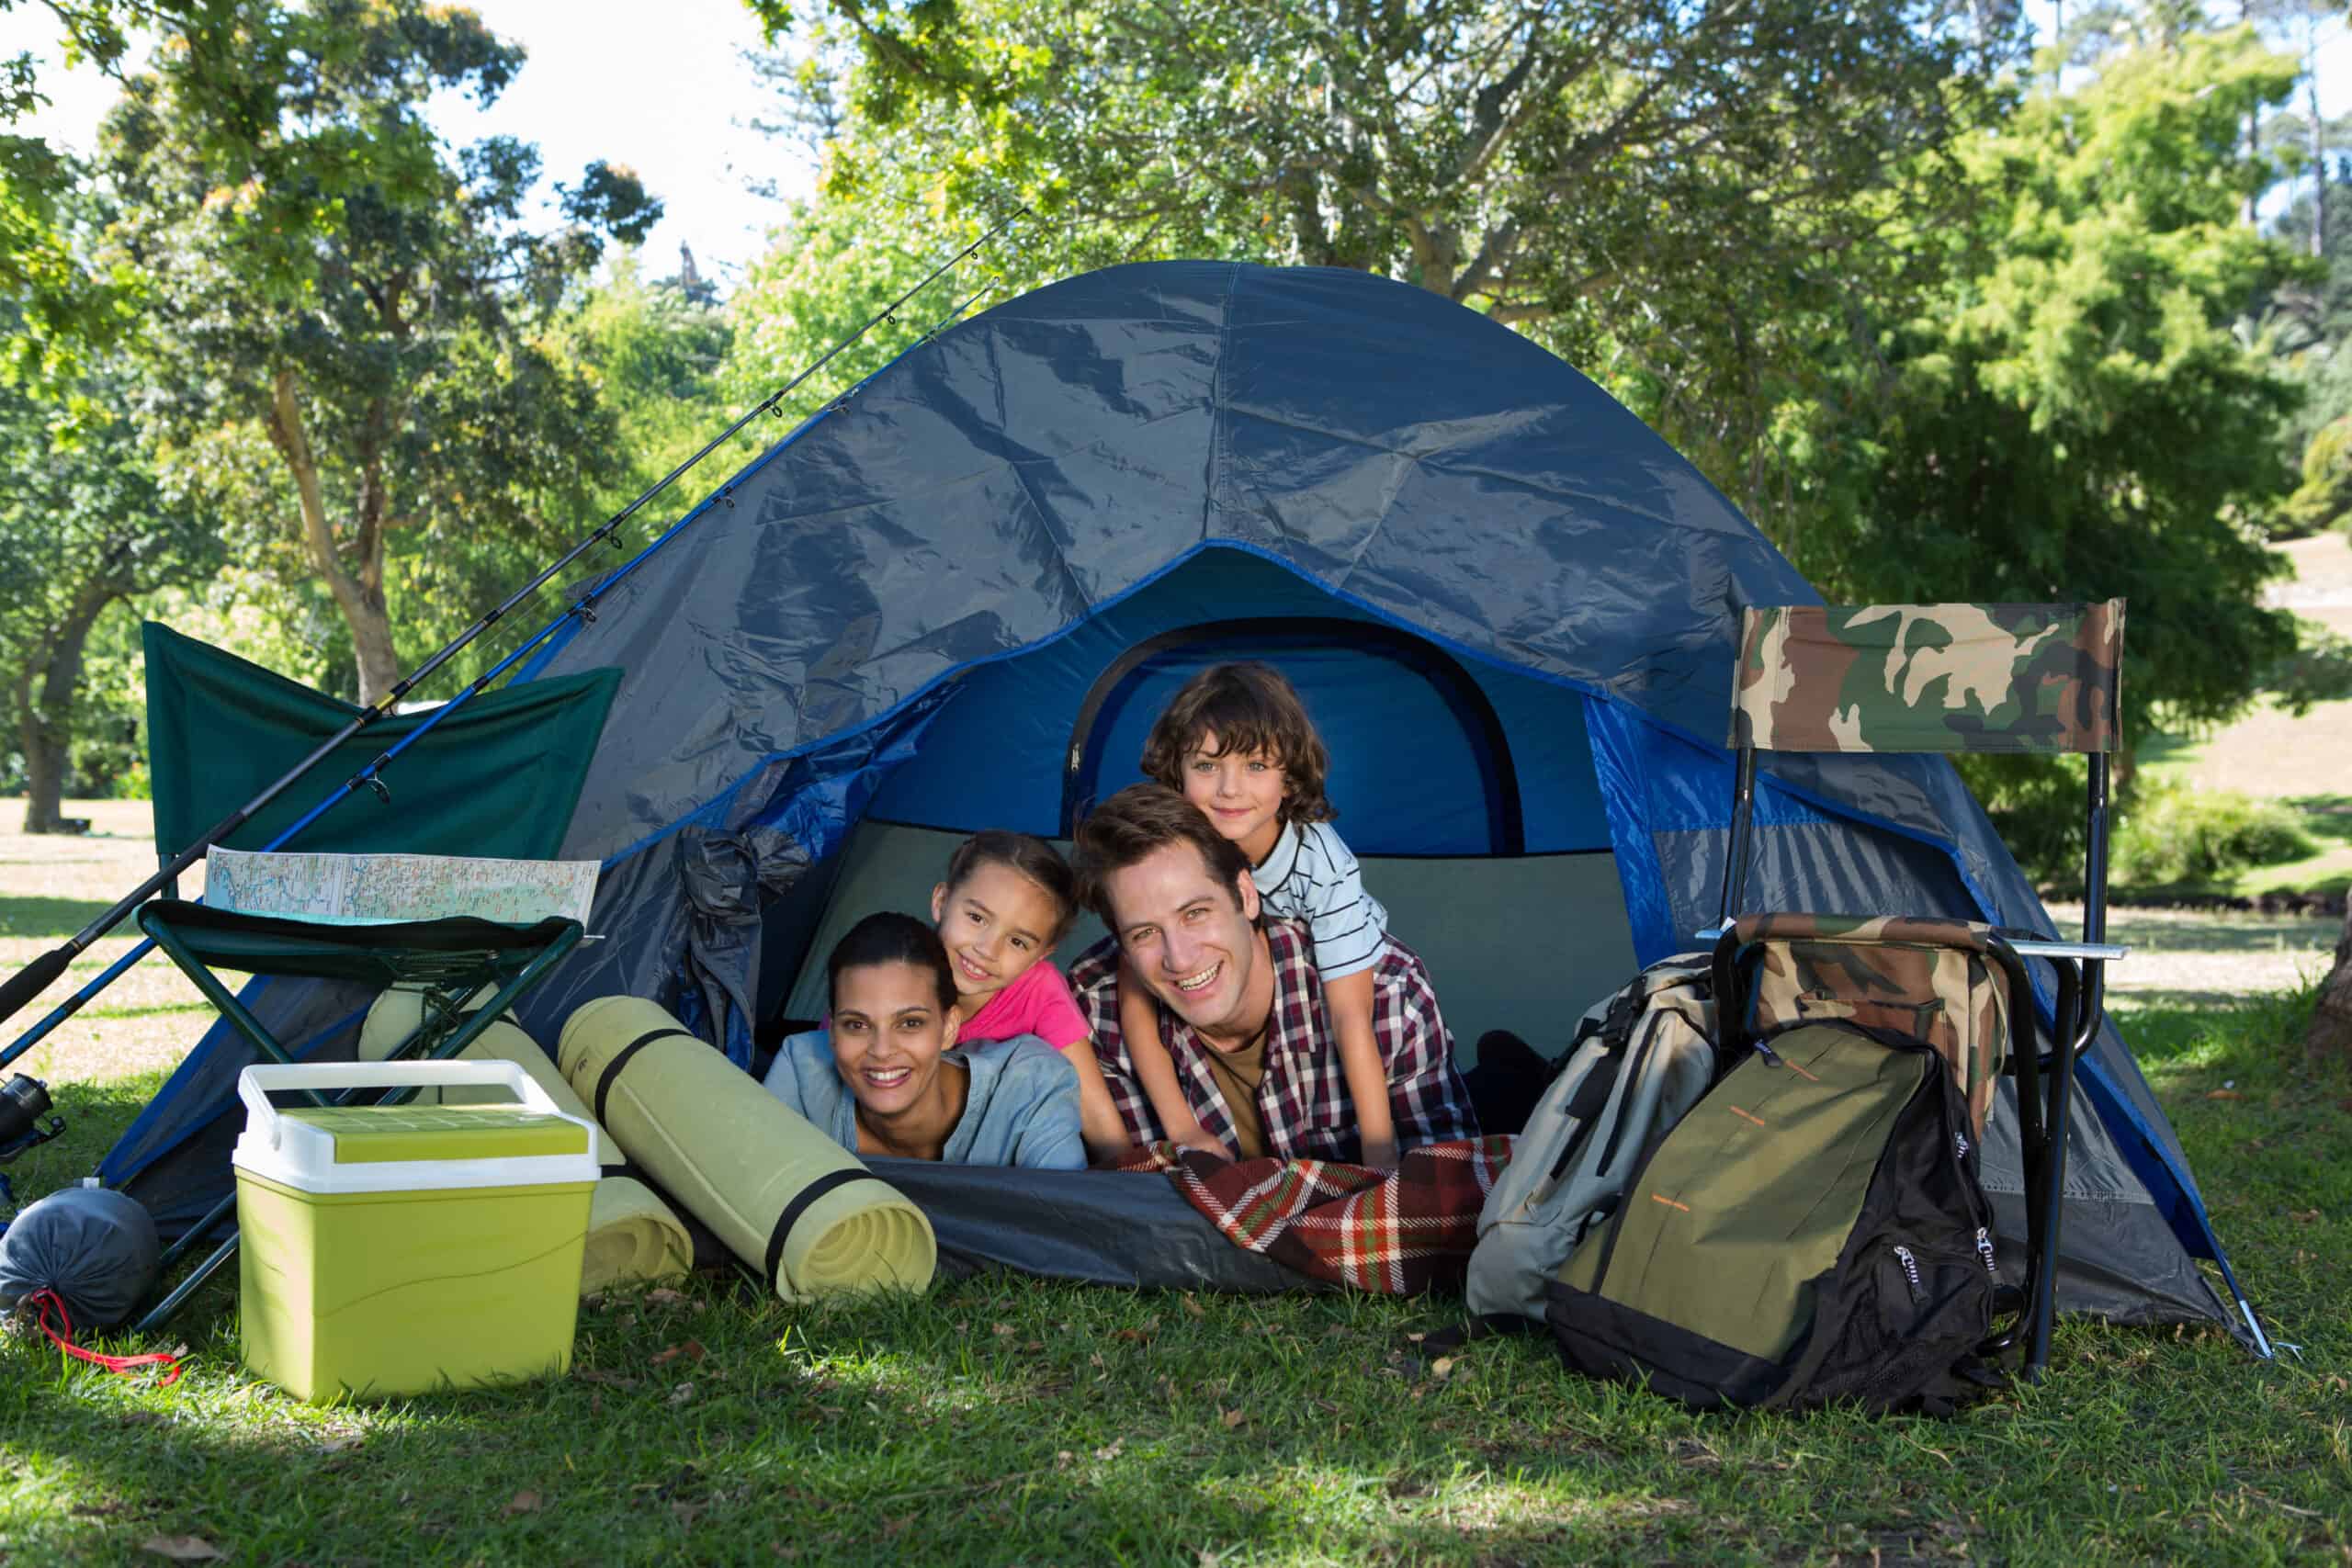 Happy family on a camping trip in their tent on a sunny day